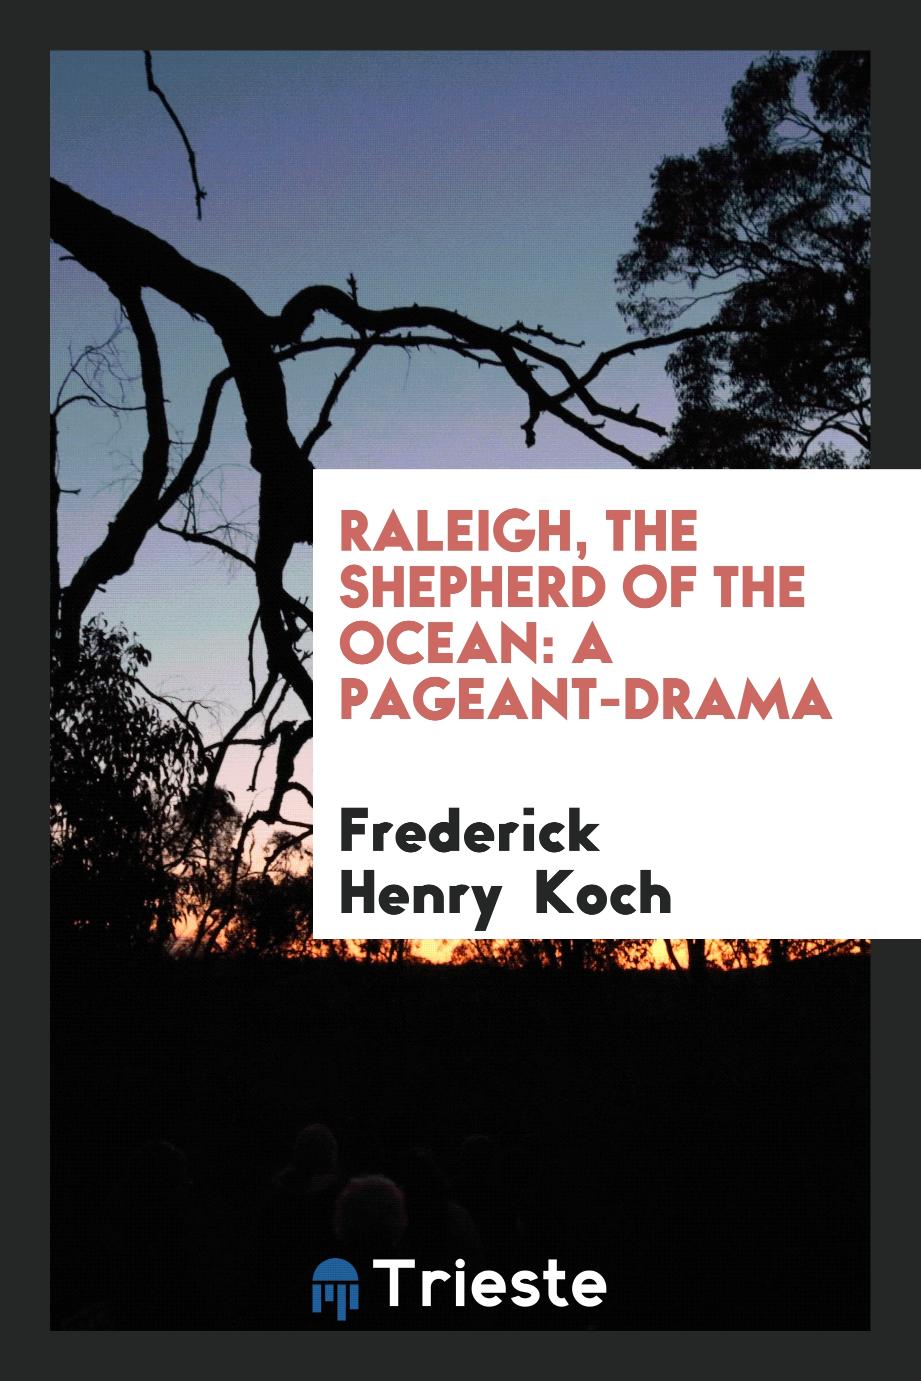 Raleigh, the Shepherd of the Ocean: A Pageant-Drama